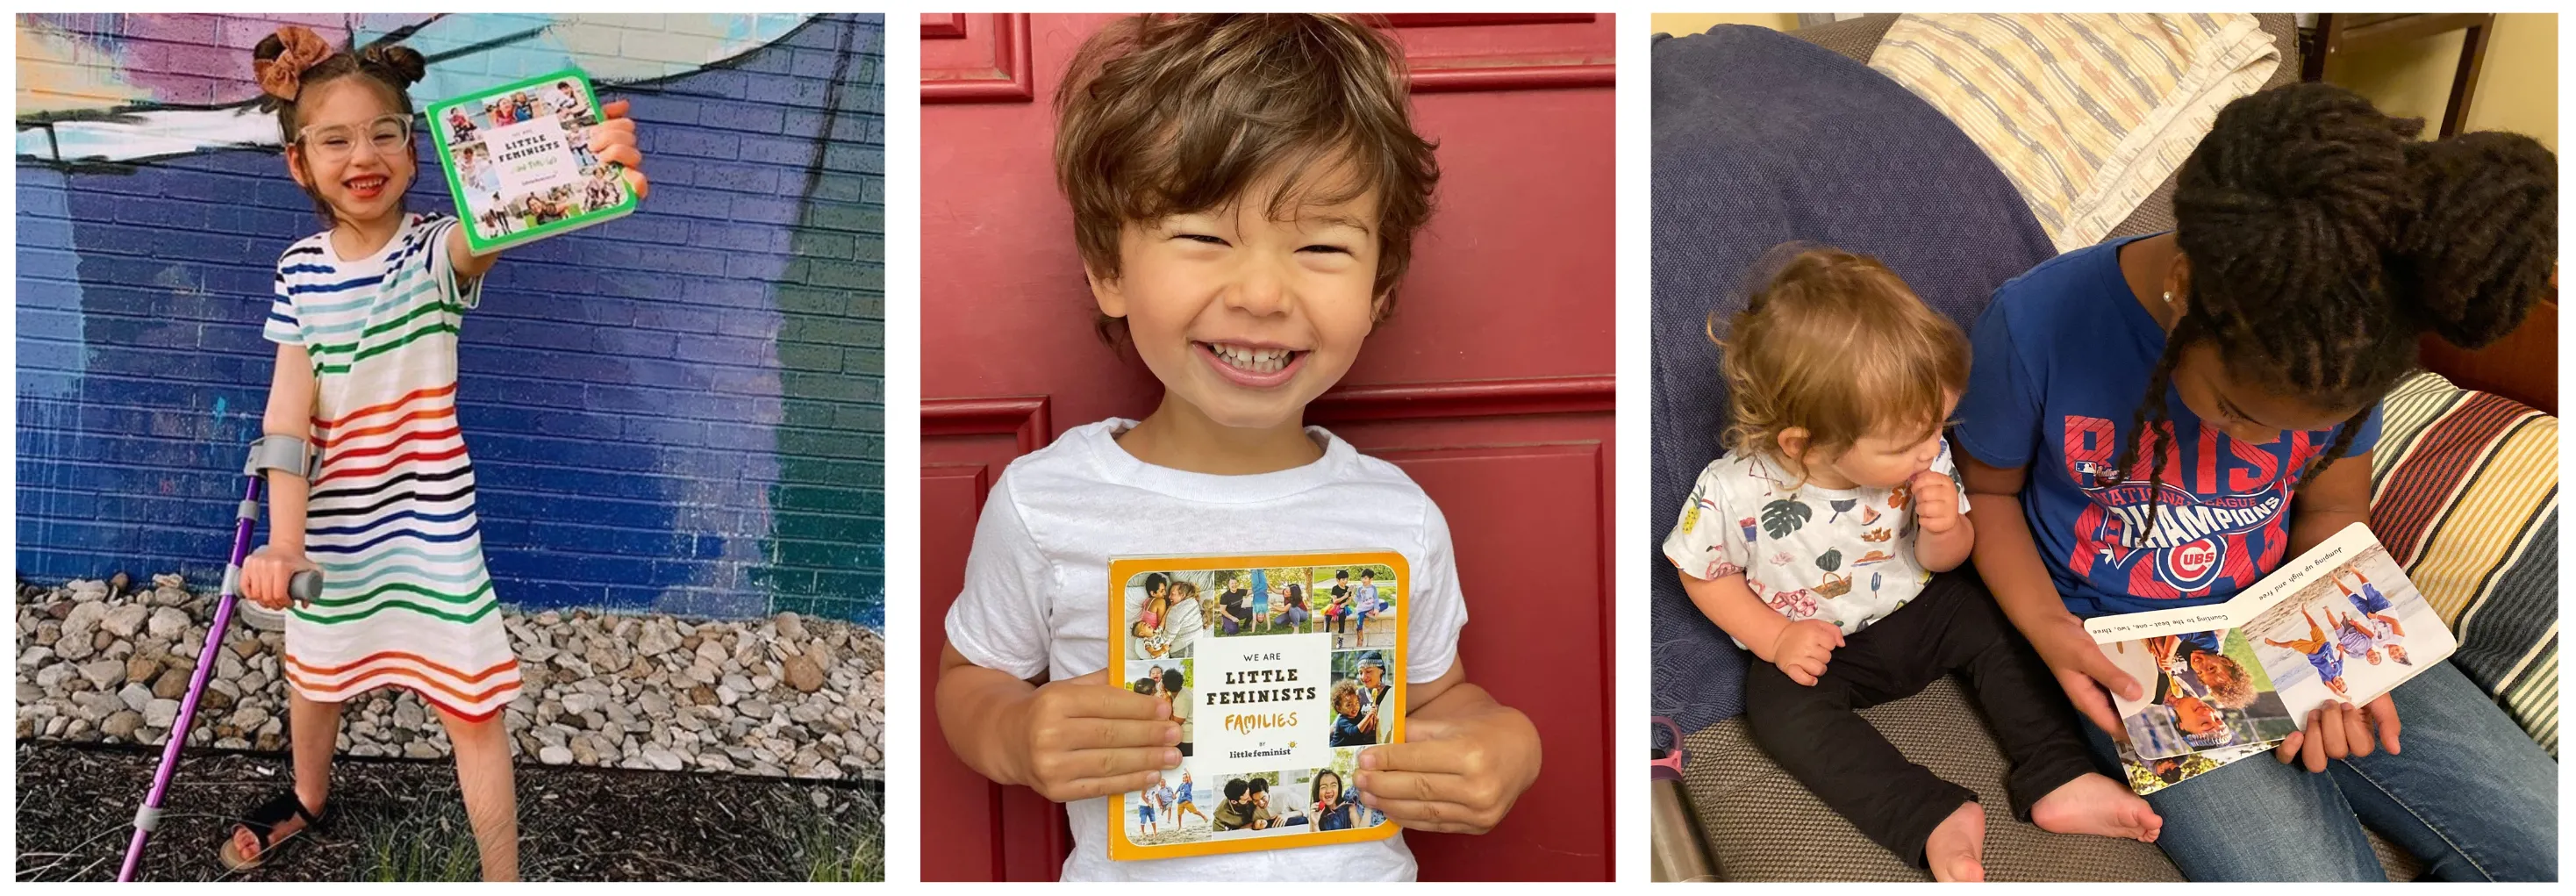 Photos of kids with Little Feminist books